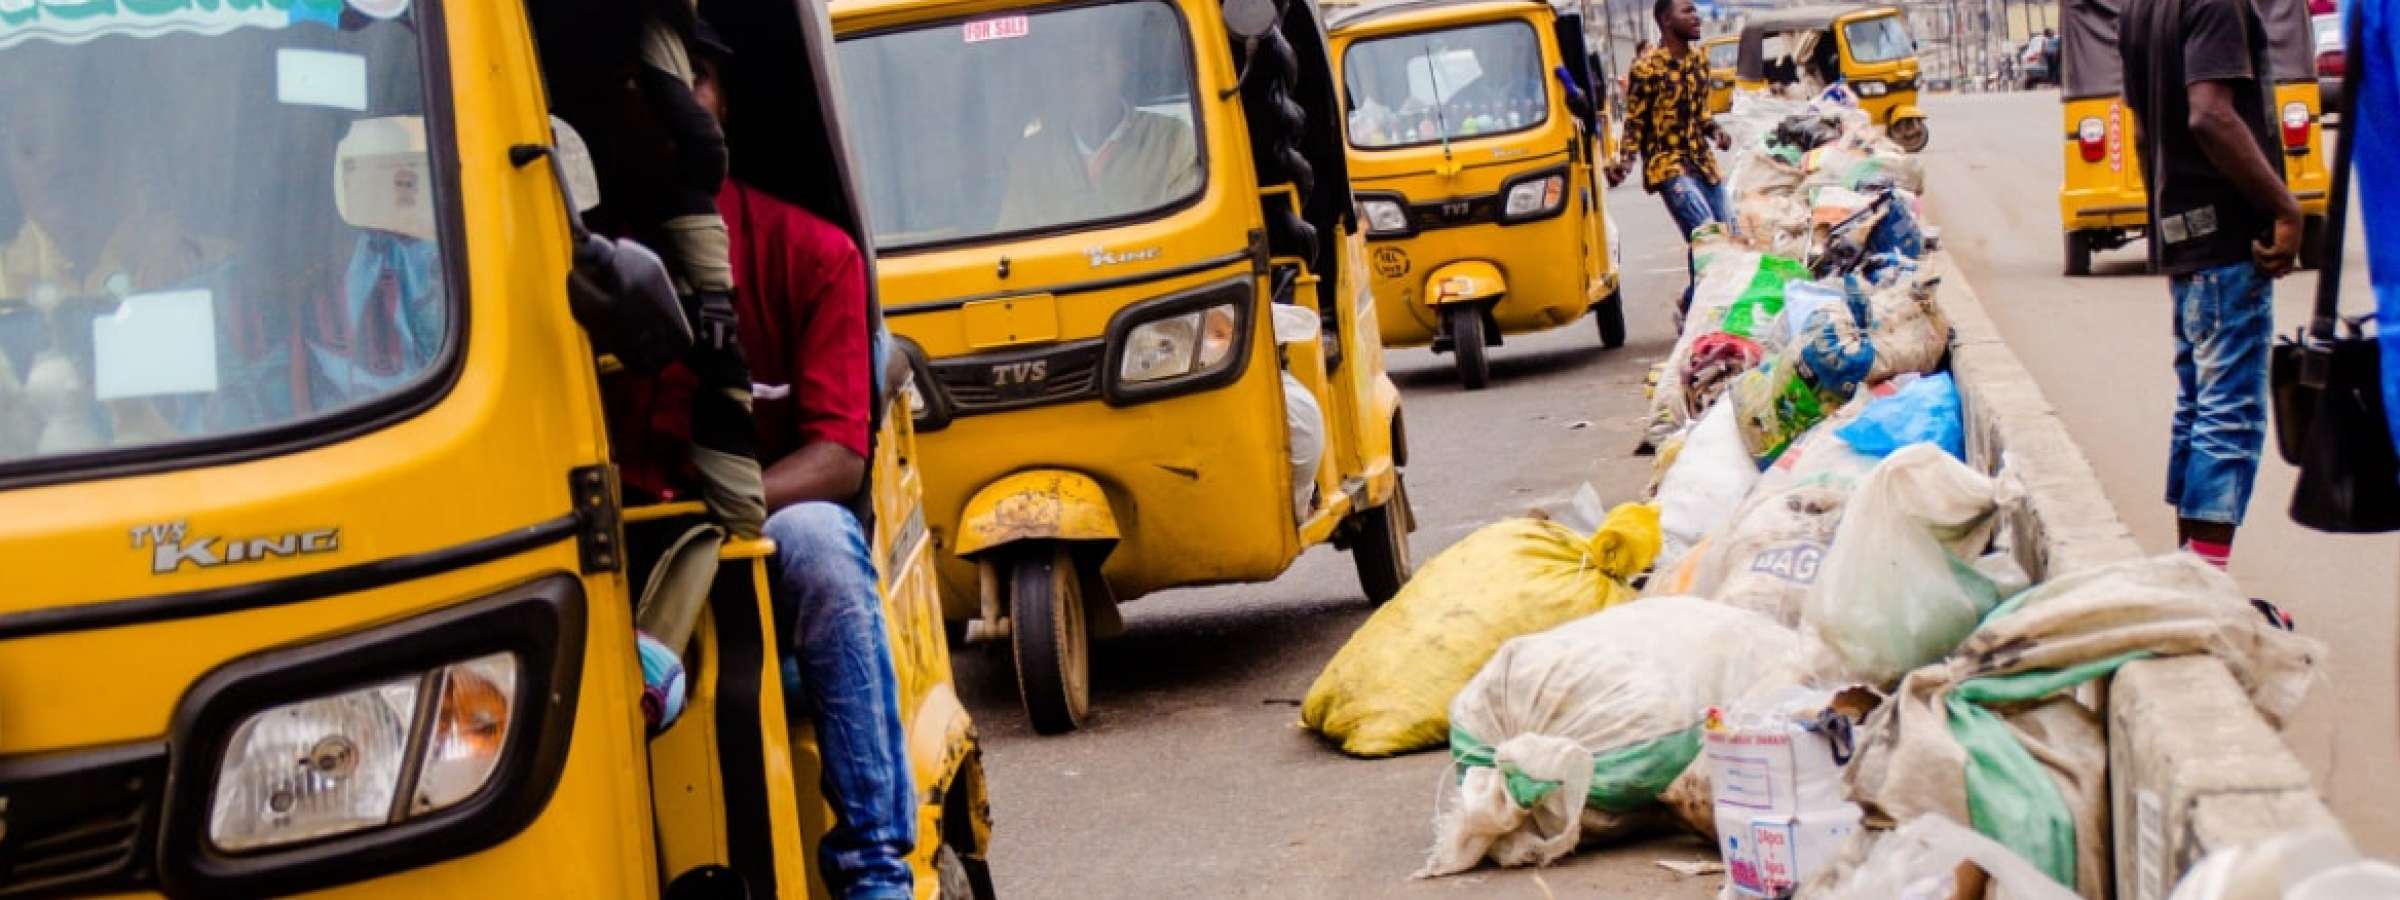 Waste laying on the streets in Nigeria. Yellow tricycles pass the waste along the road.